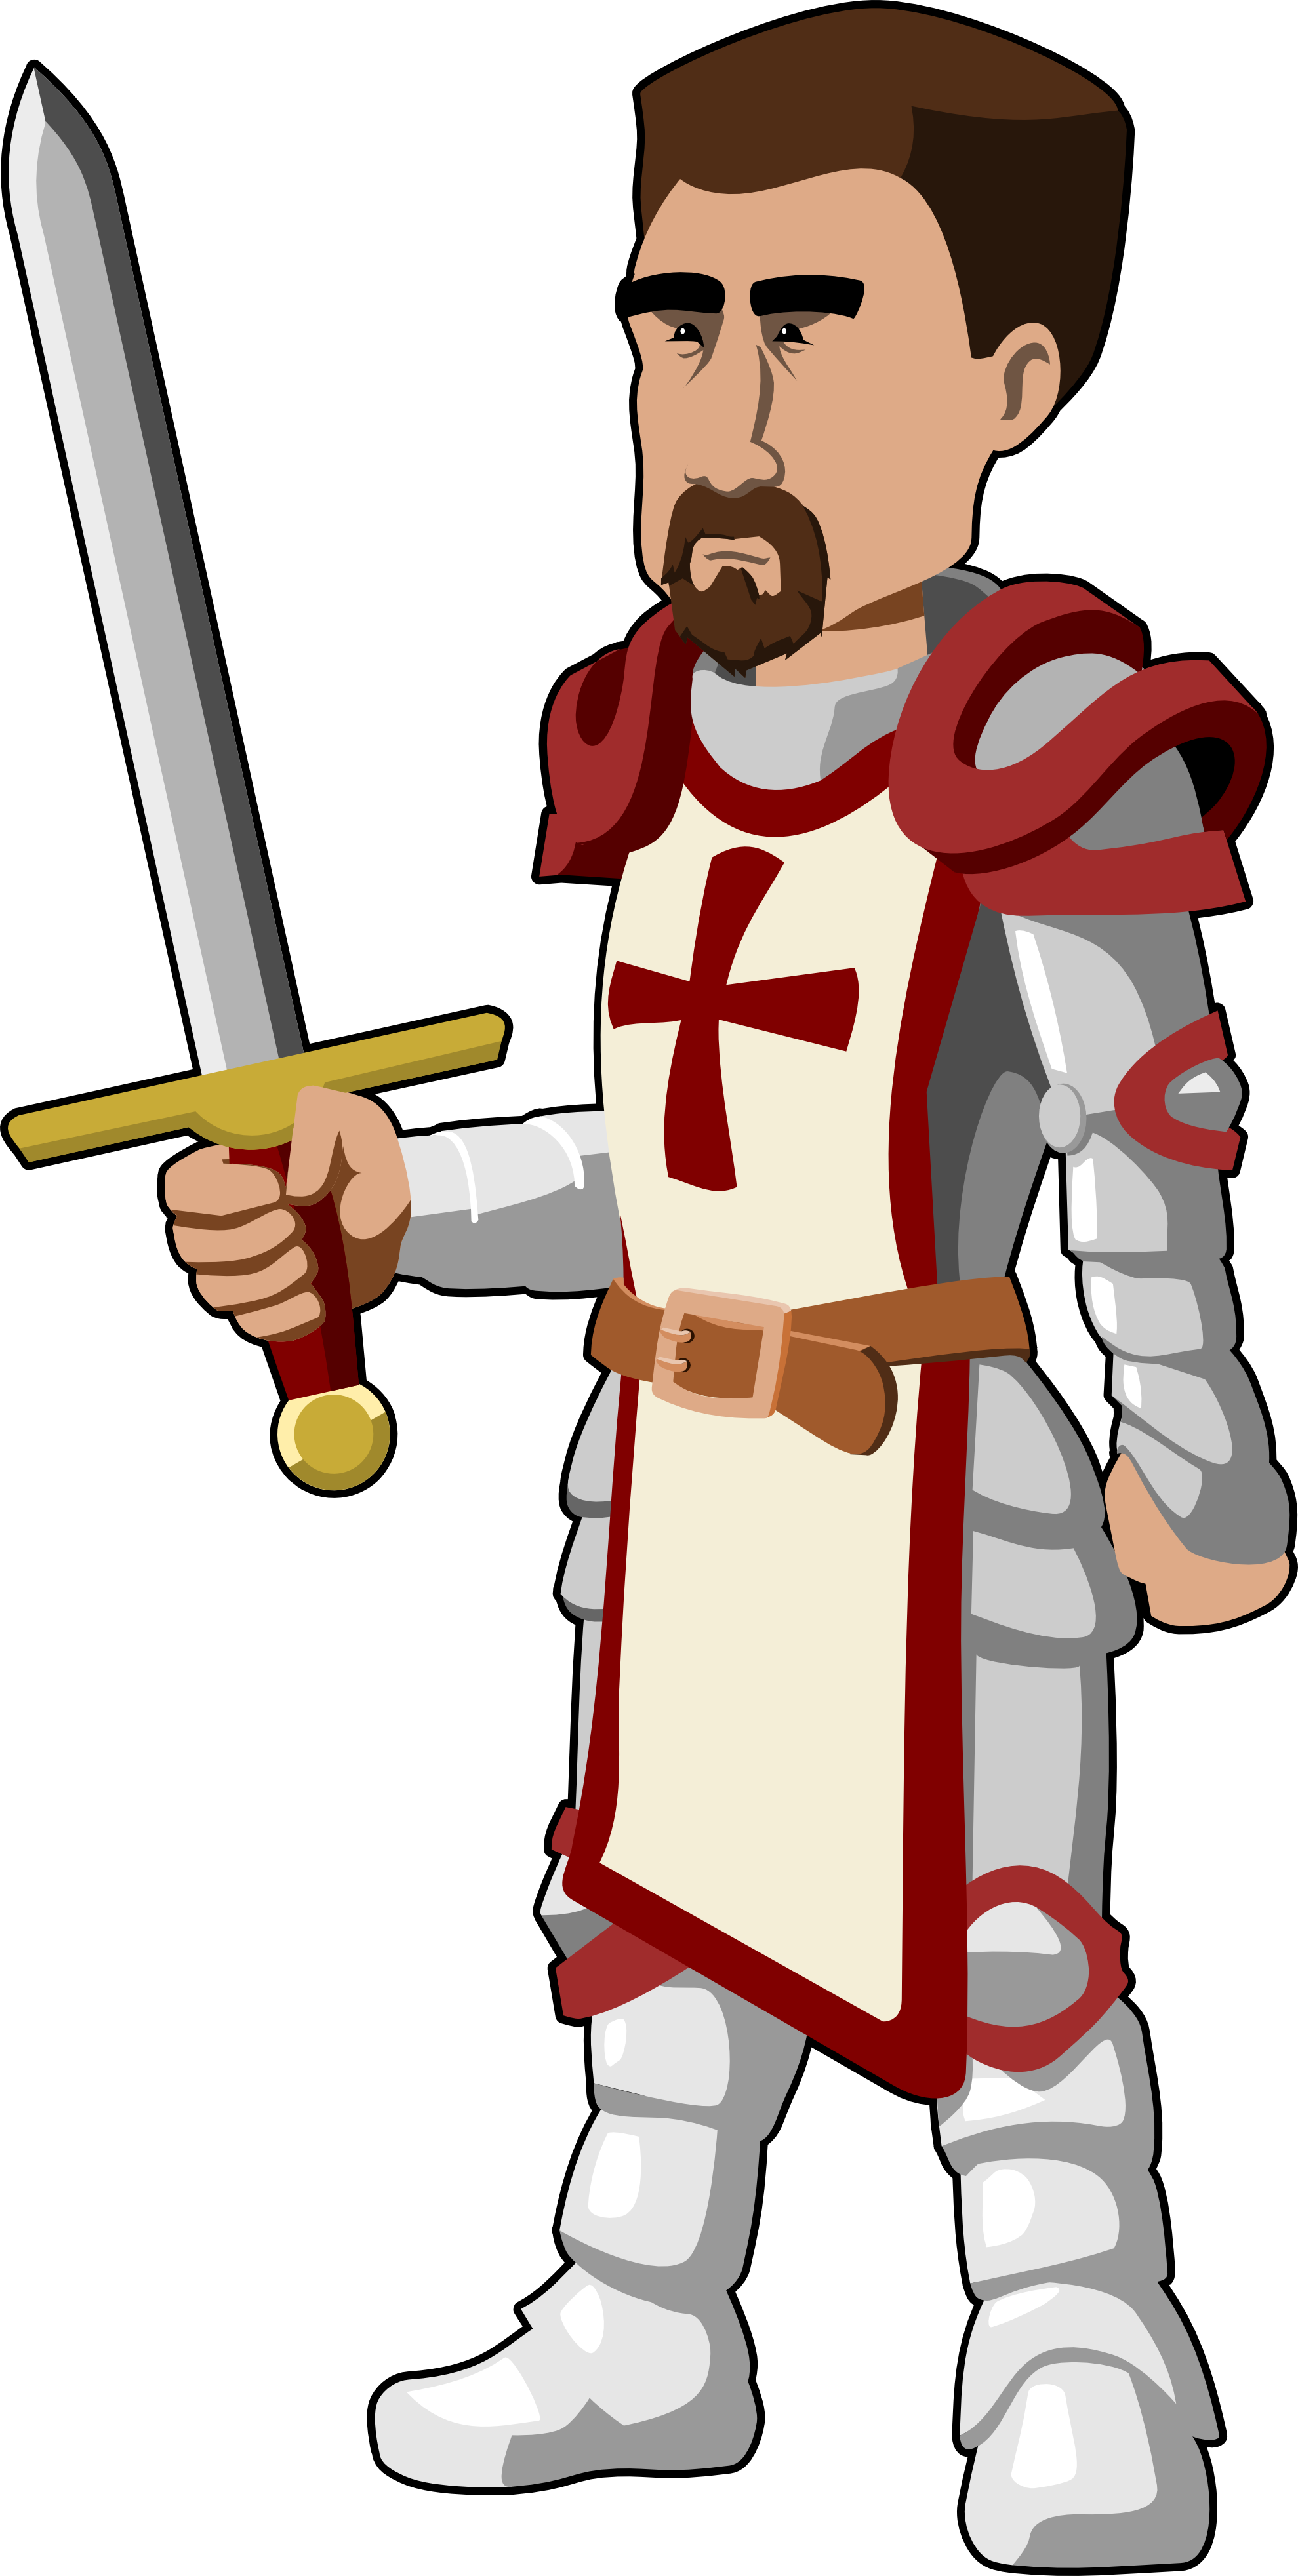 Free Lord Cliparts, Download Free Clip Art, Free Clip Art on